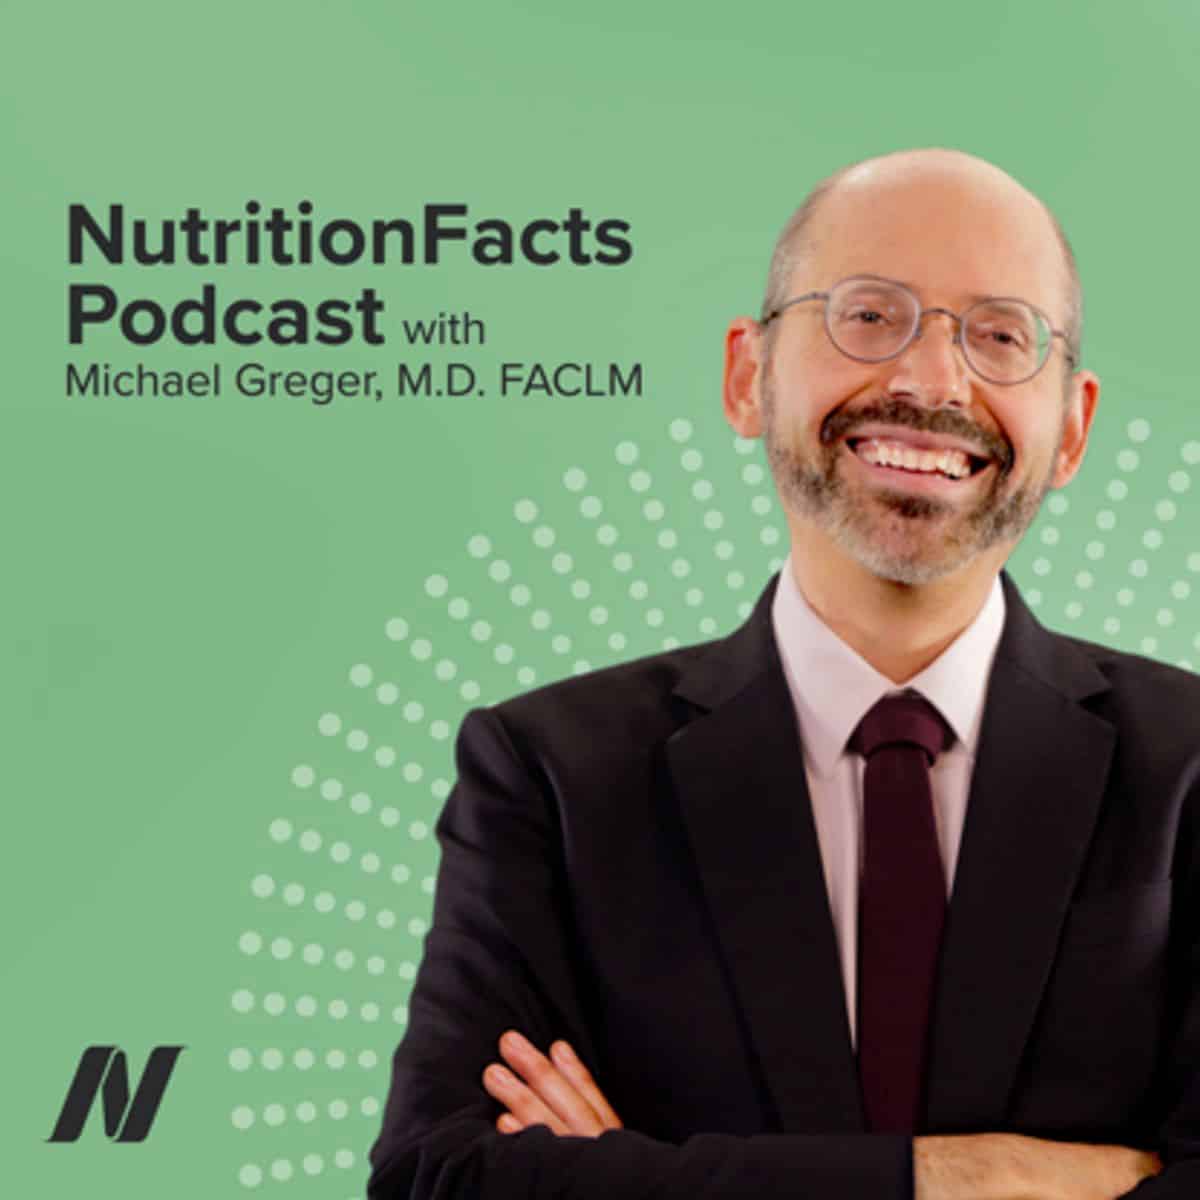 Nutrition Facts Podcast with Dr. Michael Greger cover art.